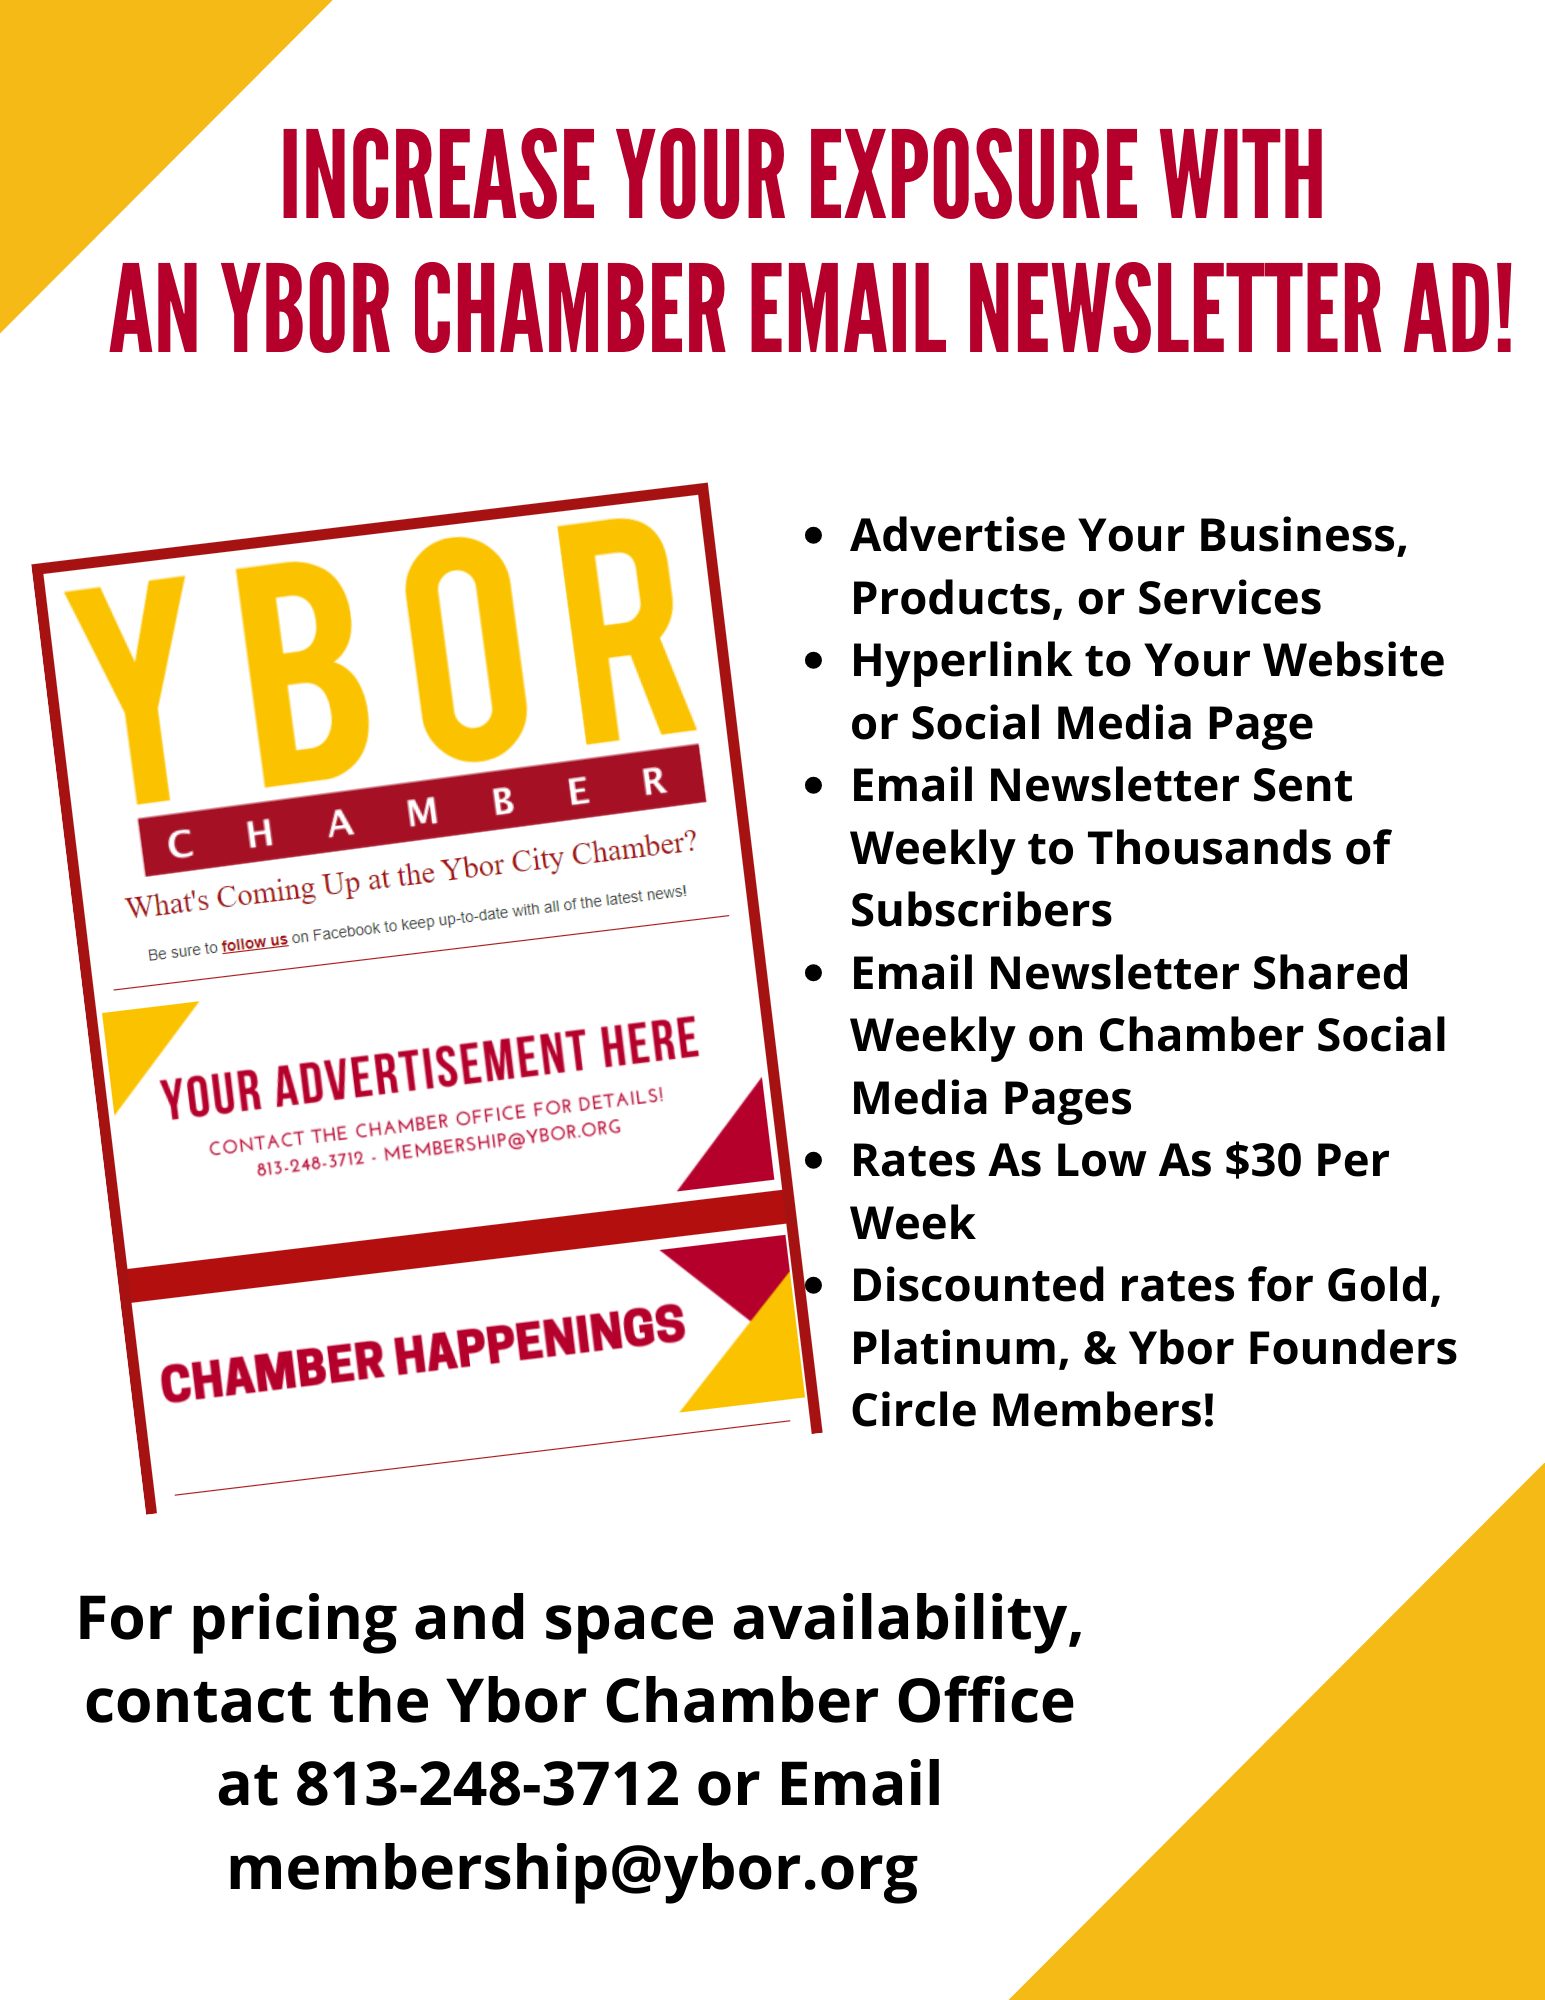 INCREASE YOUR EXPOSURE WITH AM YBOR CHAMBER E-BLAST AD! (1)